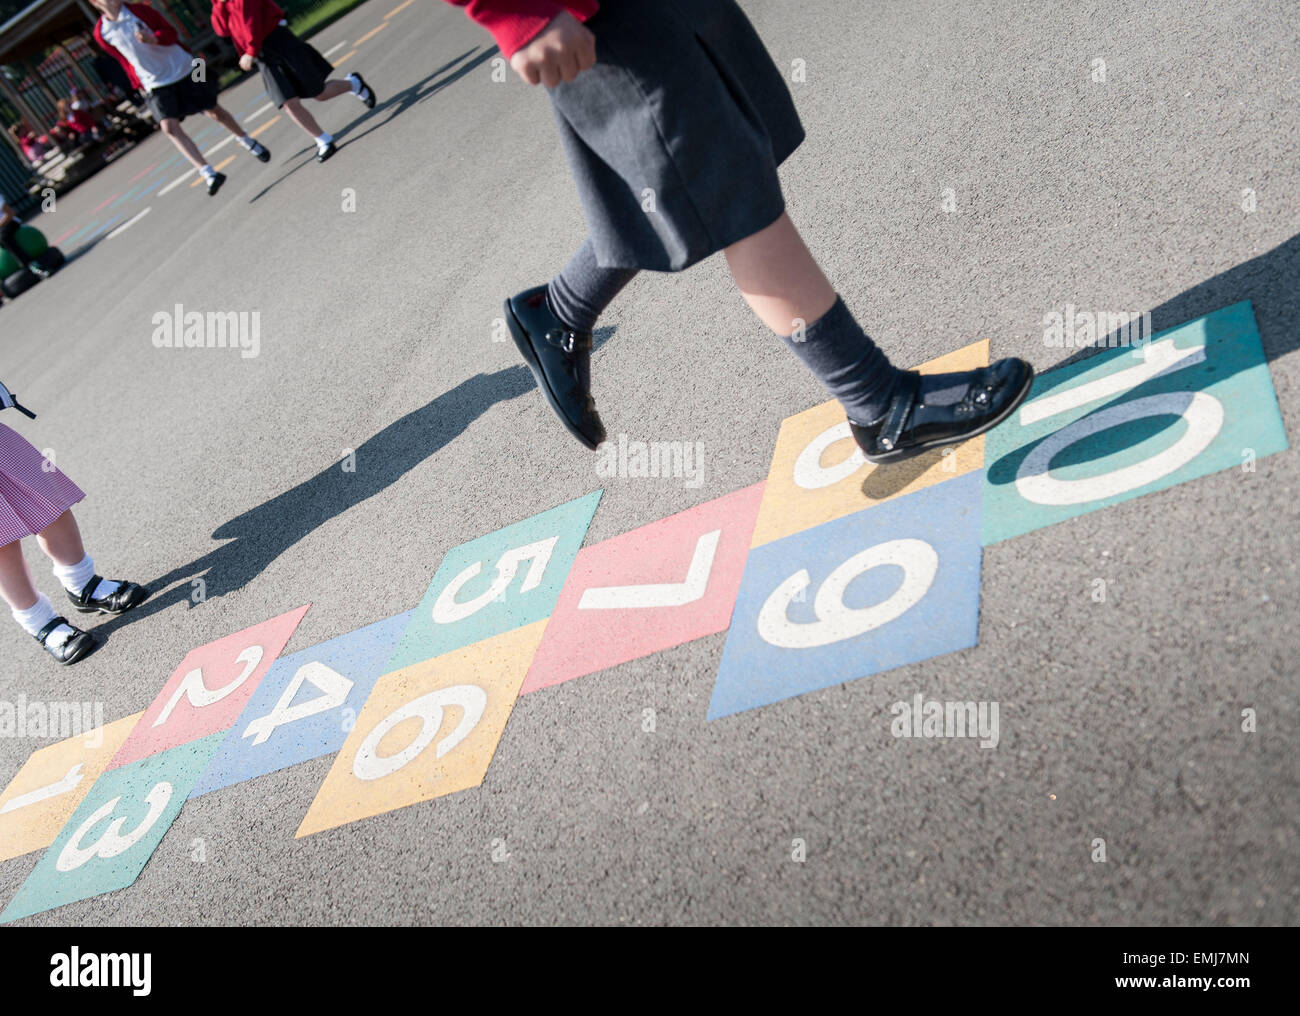 A UK schoolgirl plays hopscotch in the school playground Stock Photo